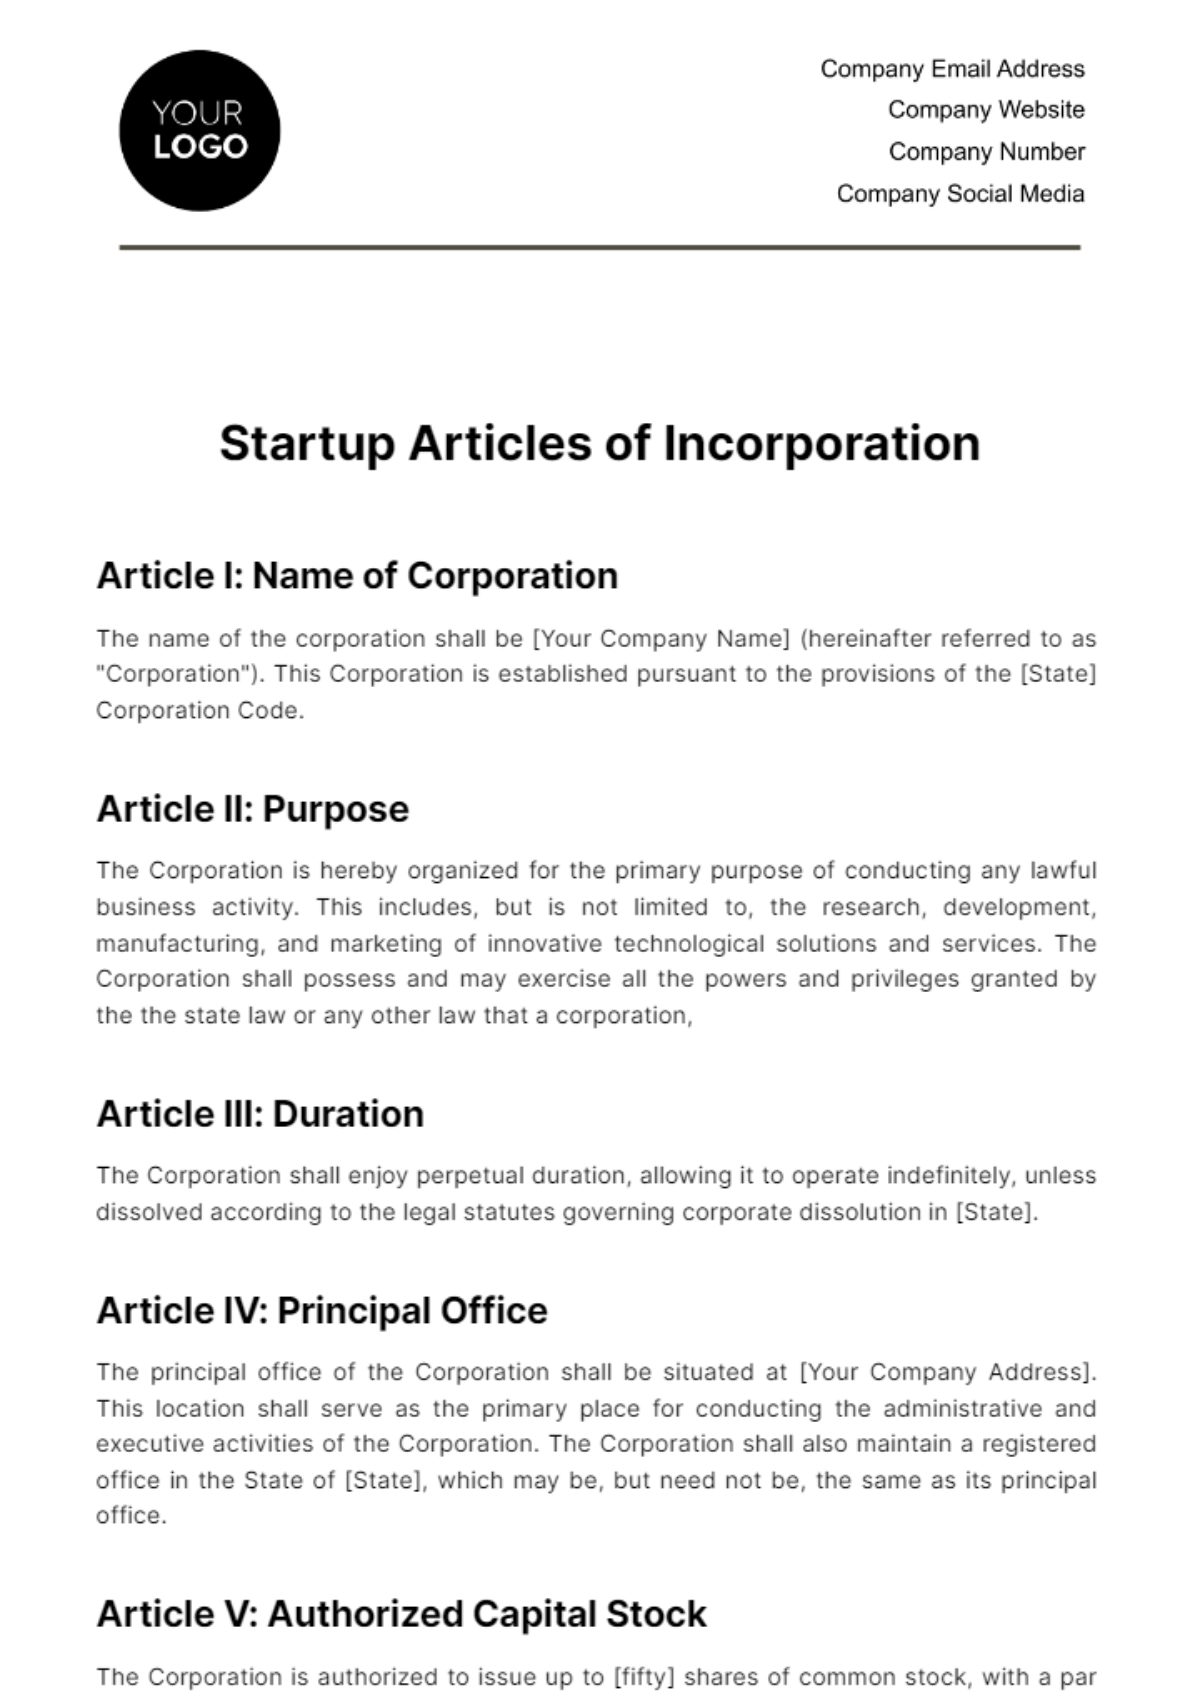 Startup Articles of Incorporation Template